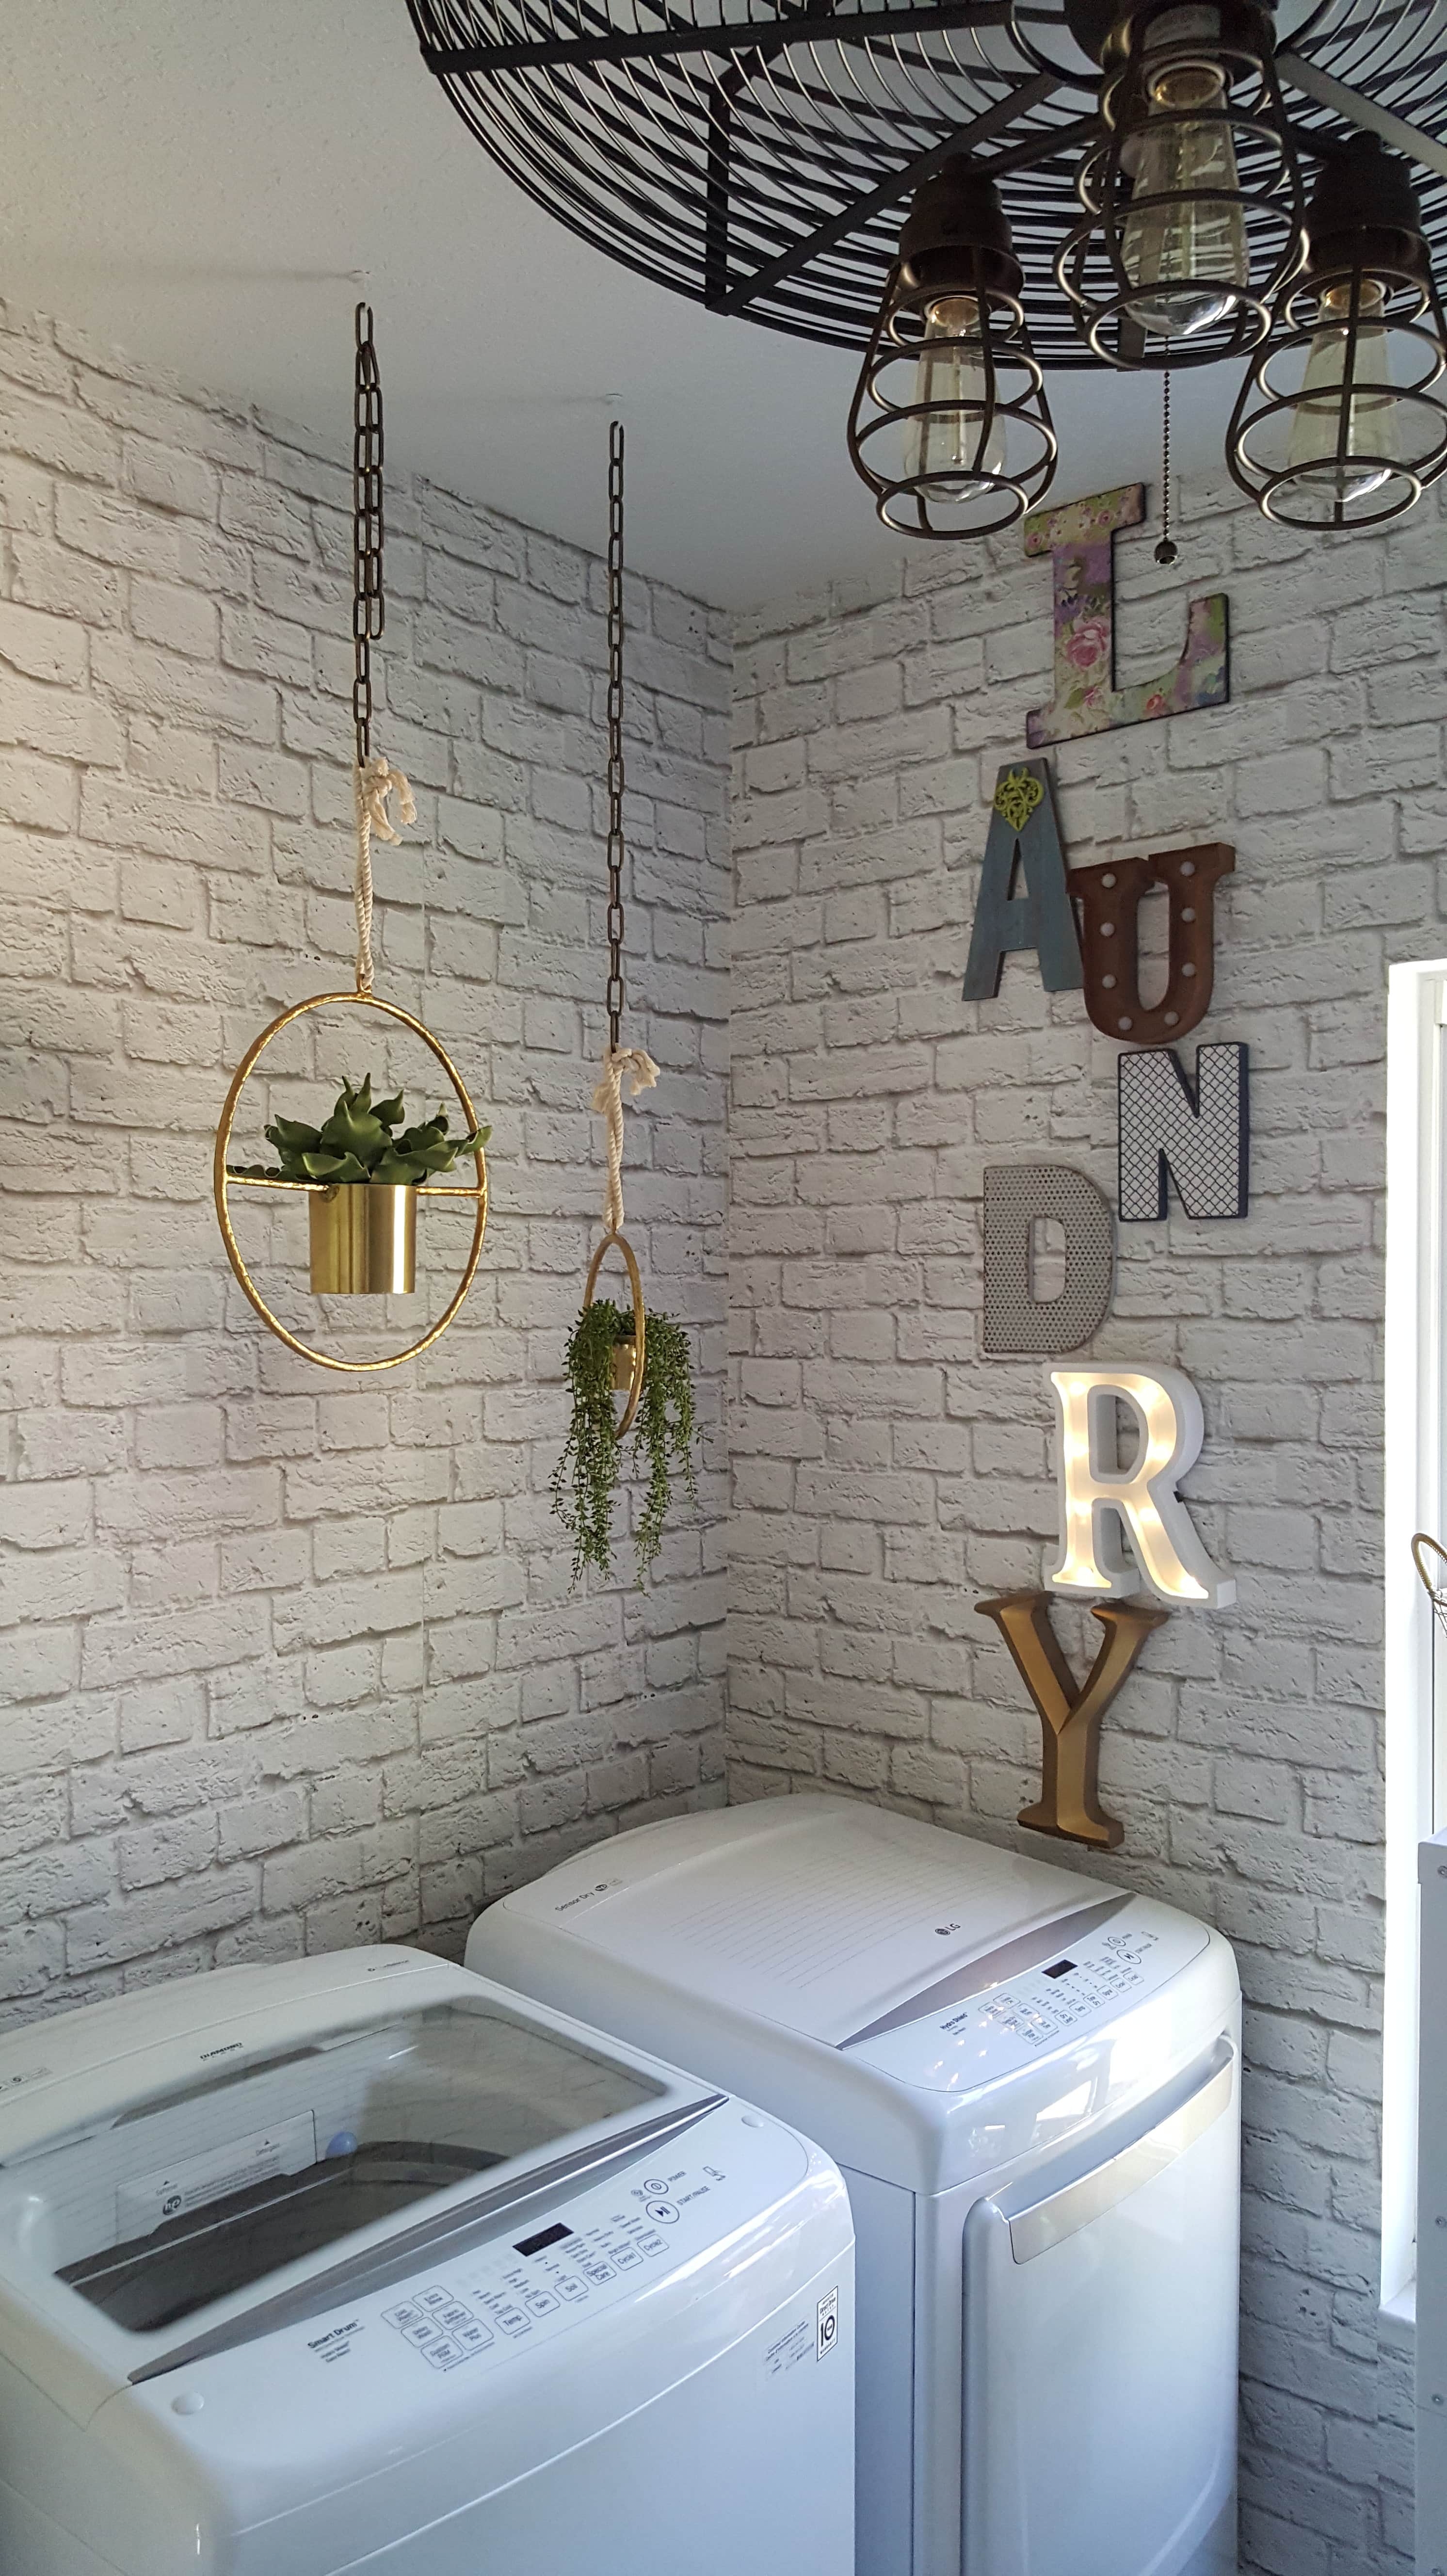 Beesnburlap One Room Challenge Urban Industrial Vintage Glam Laundry Room Reveal Makeover DIY Inspiration Brick Wallpaper Wood Wall Modern Farmhouse Decor White Sink Vintage Scale Pottery Flowers